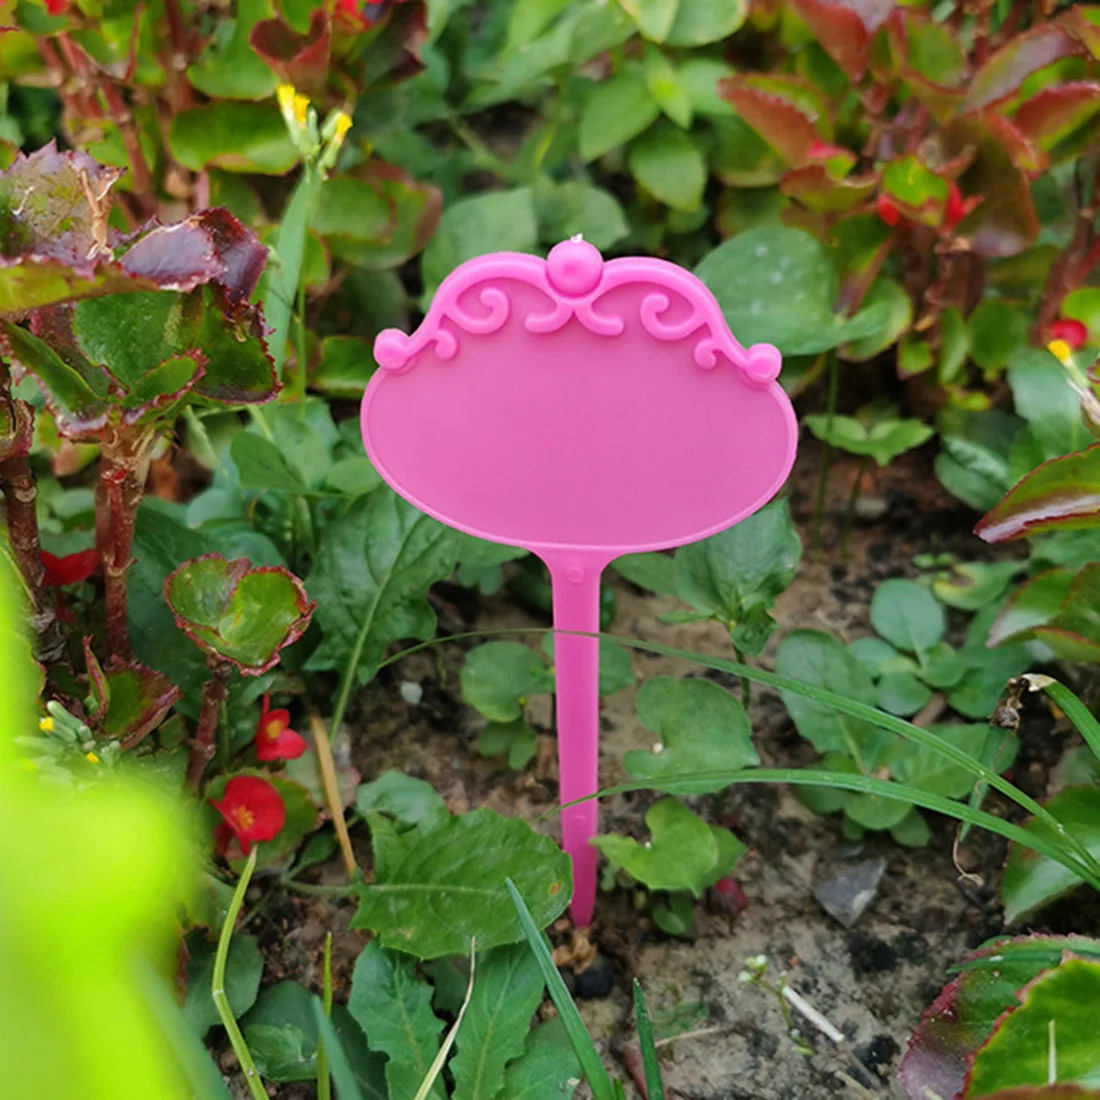 

Waterproof Garden Plant Tags PP Plastic Labels For Plants Gardening Accesorries Pot Seedling Sign Mark Planter Decor Tool